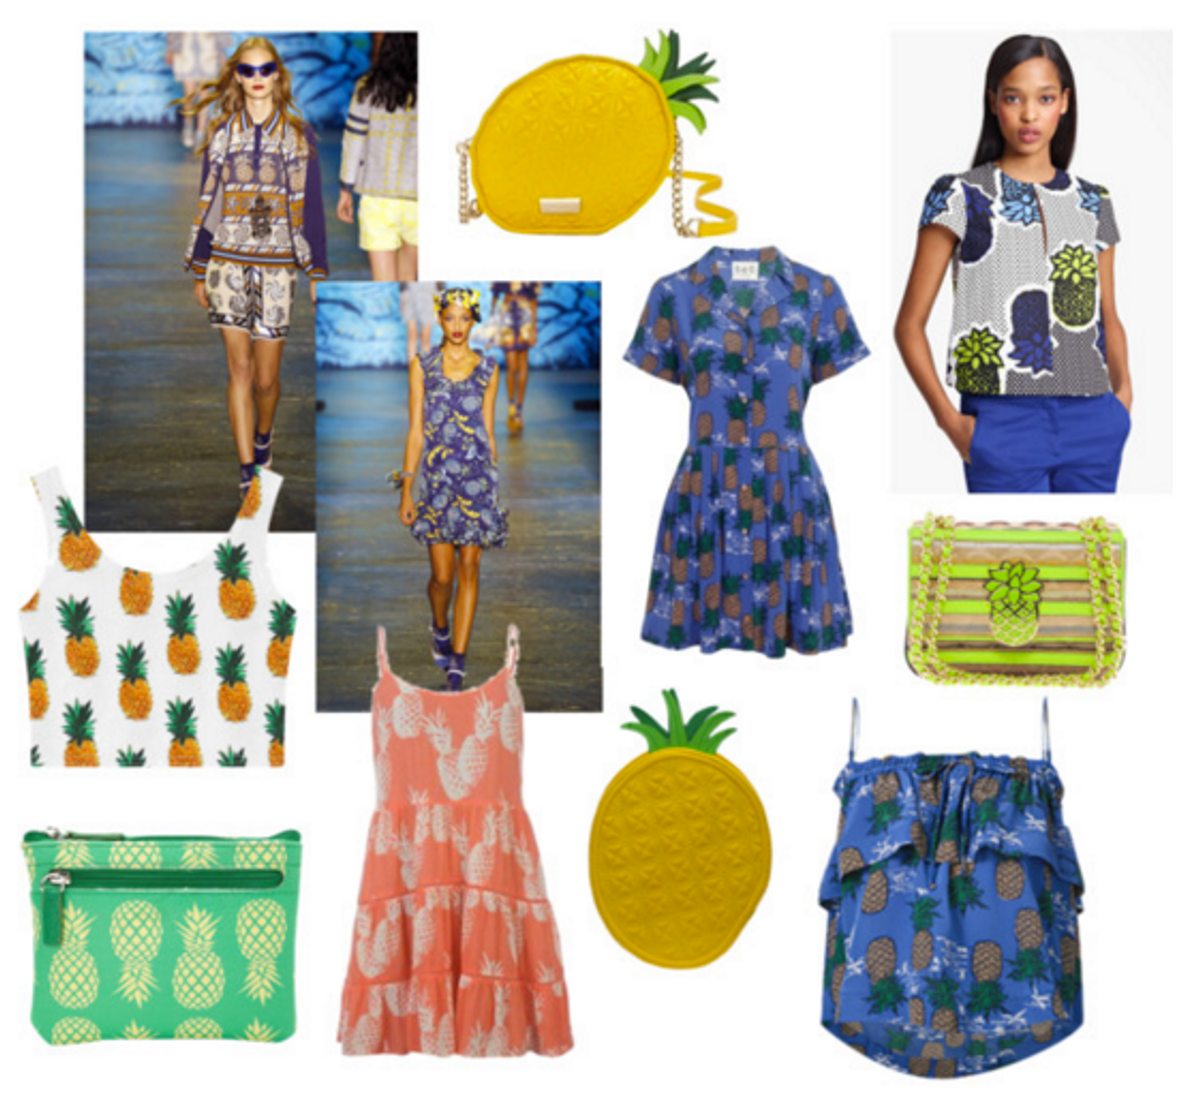 Spring 2016 Trend: the Pineapple Motif